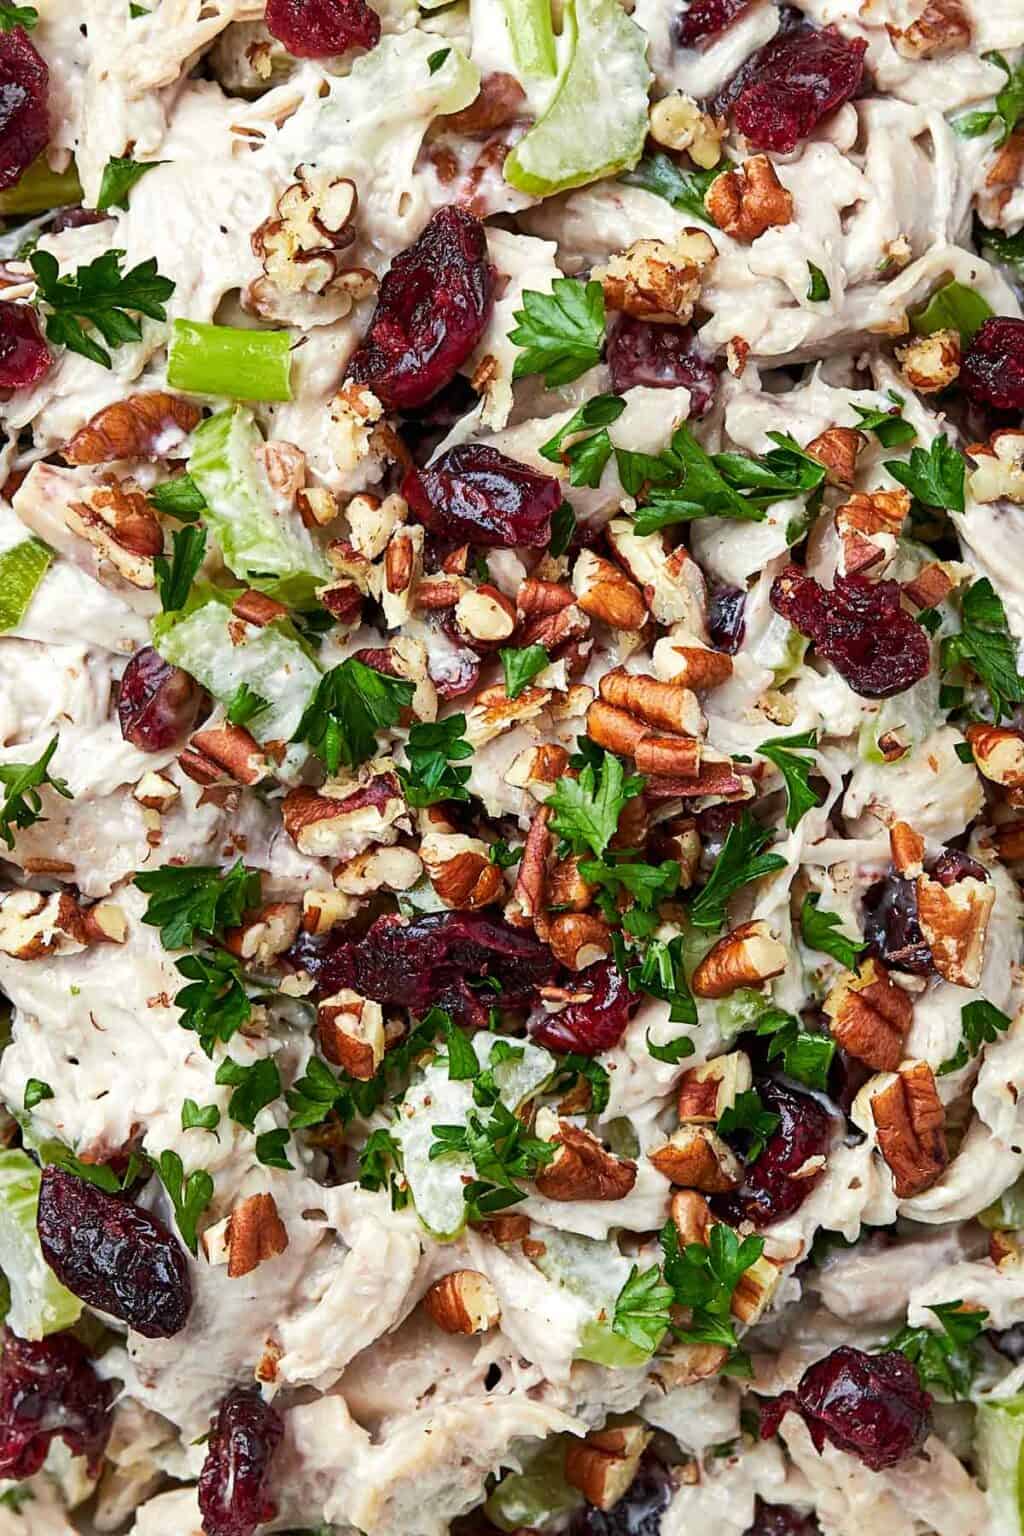 Easy Cranberry Pecan Chicken Salad - By Kelsey Smith